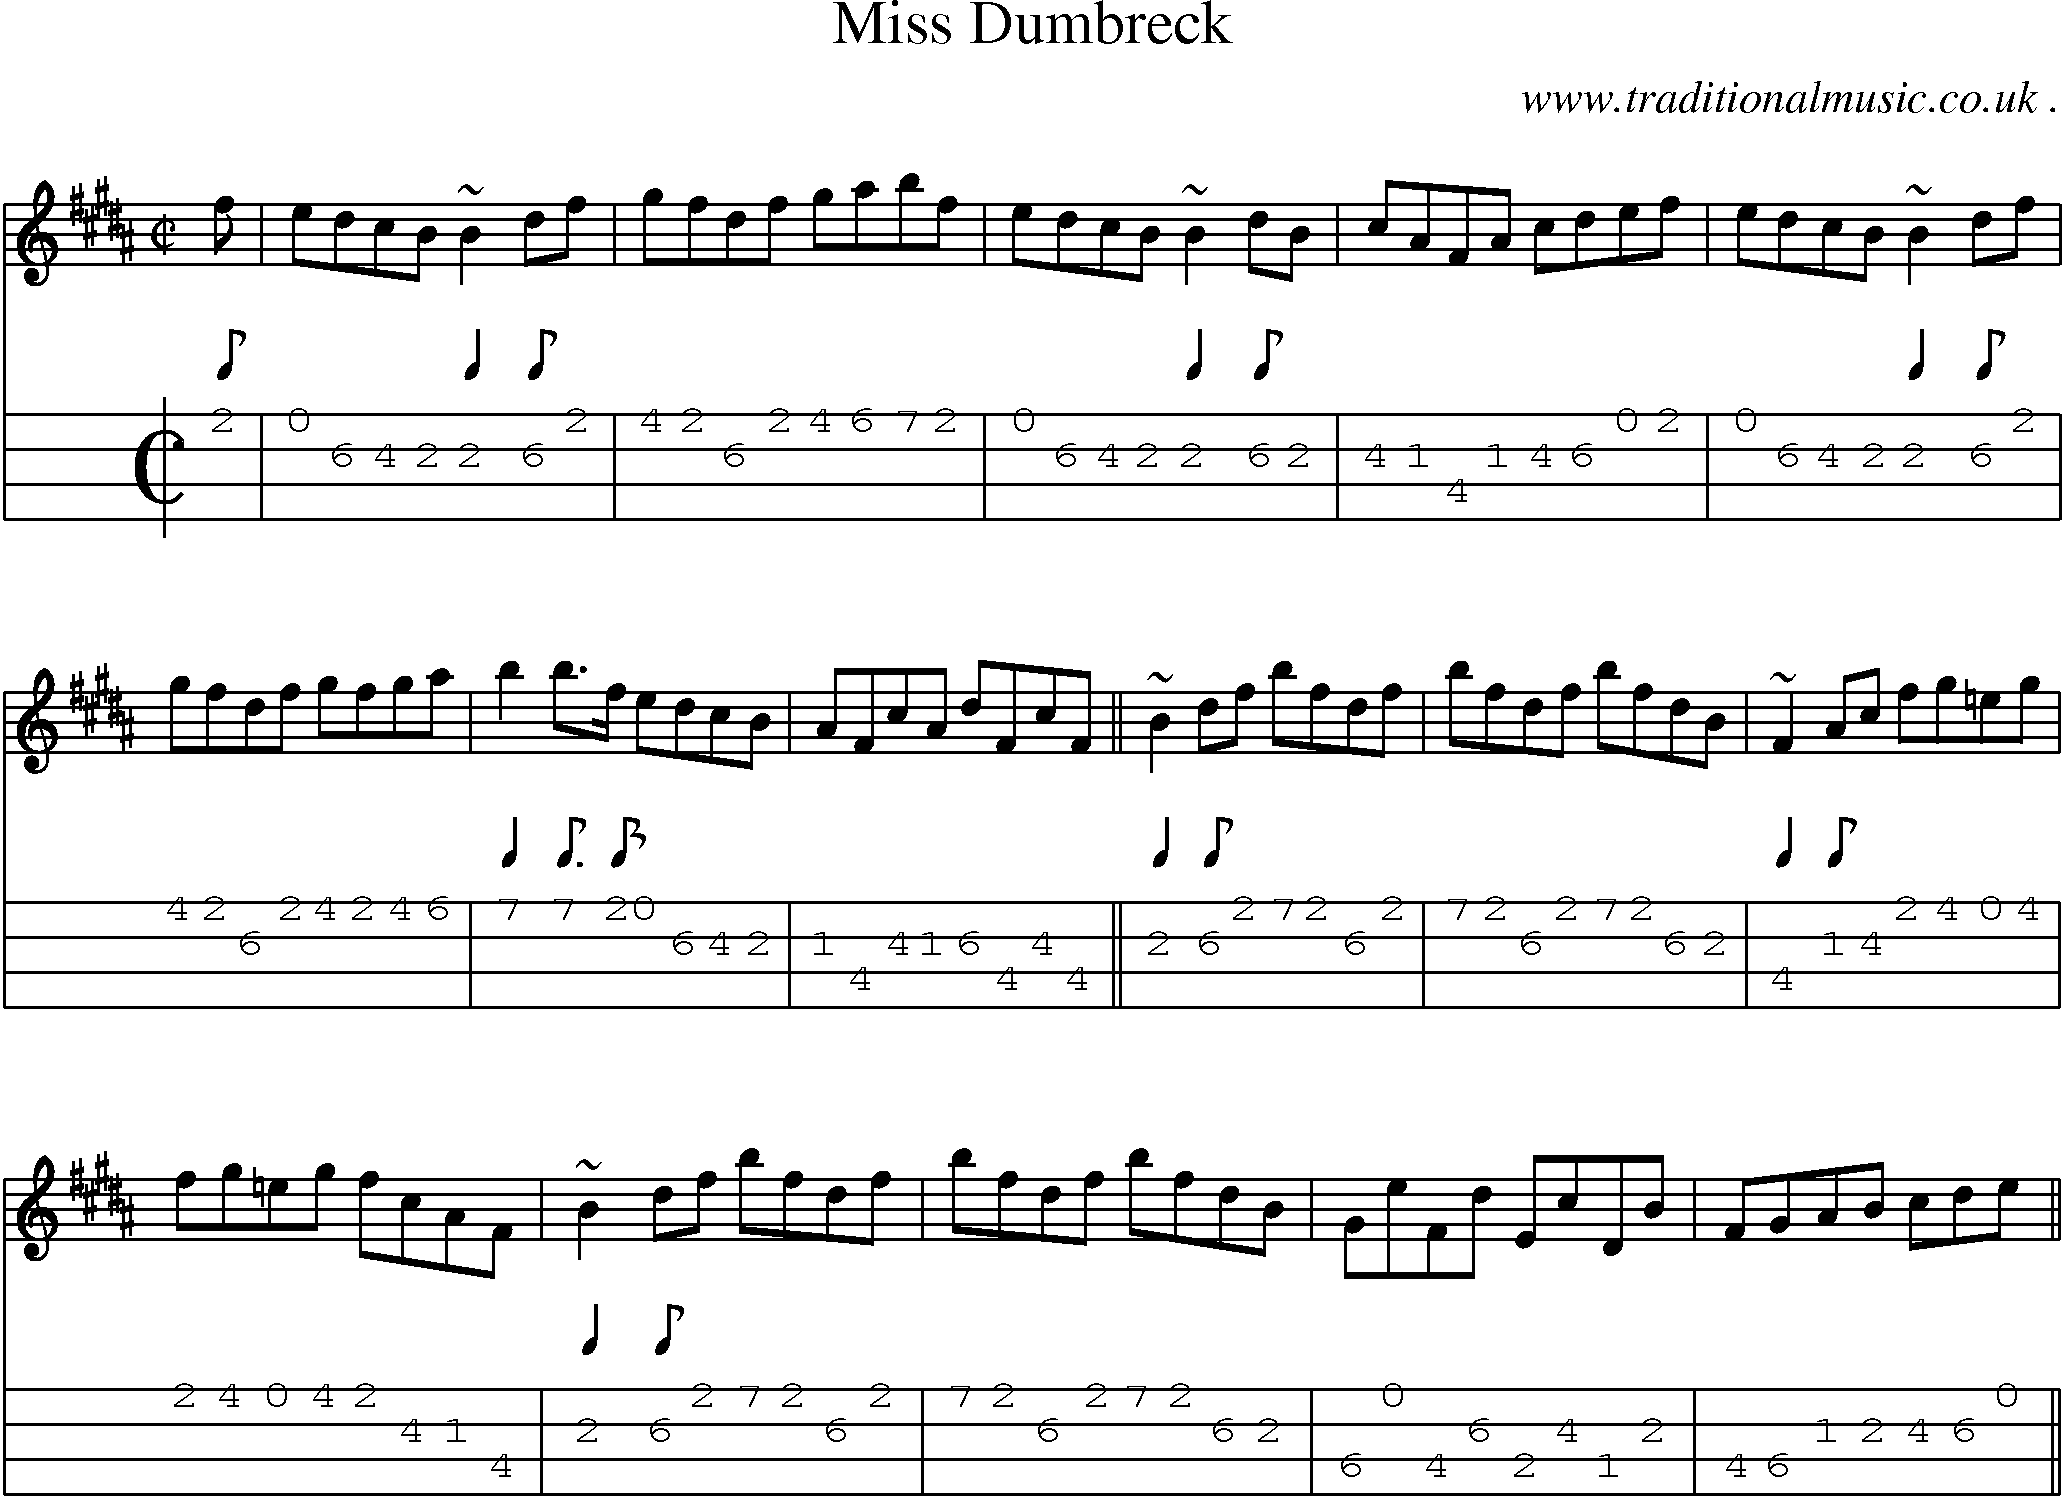 Sheet-music  score, Chords and Mandolin Tabs for Miss Dumbreck